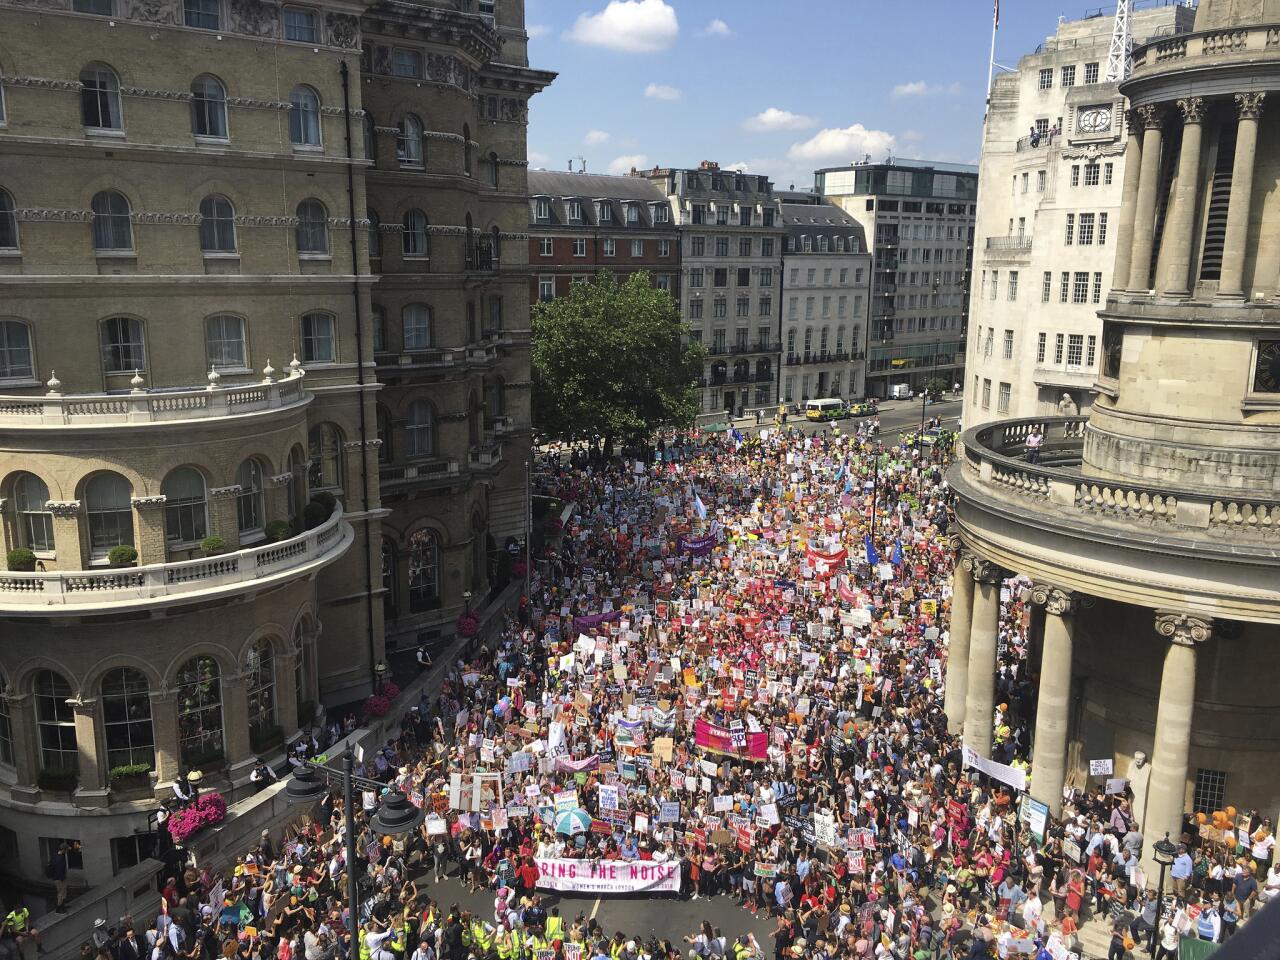 Protesters for the "Stop Trump" women's march gather in London. Trump's pomp-filled welcome to Britain was overshadowed Friday by an explosive interview in which he blasted Prime Minister Theresa May, blamed London's mayor for terror attacks against the city and argued that Europe was "losing its culture" because of immigration.